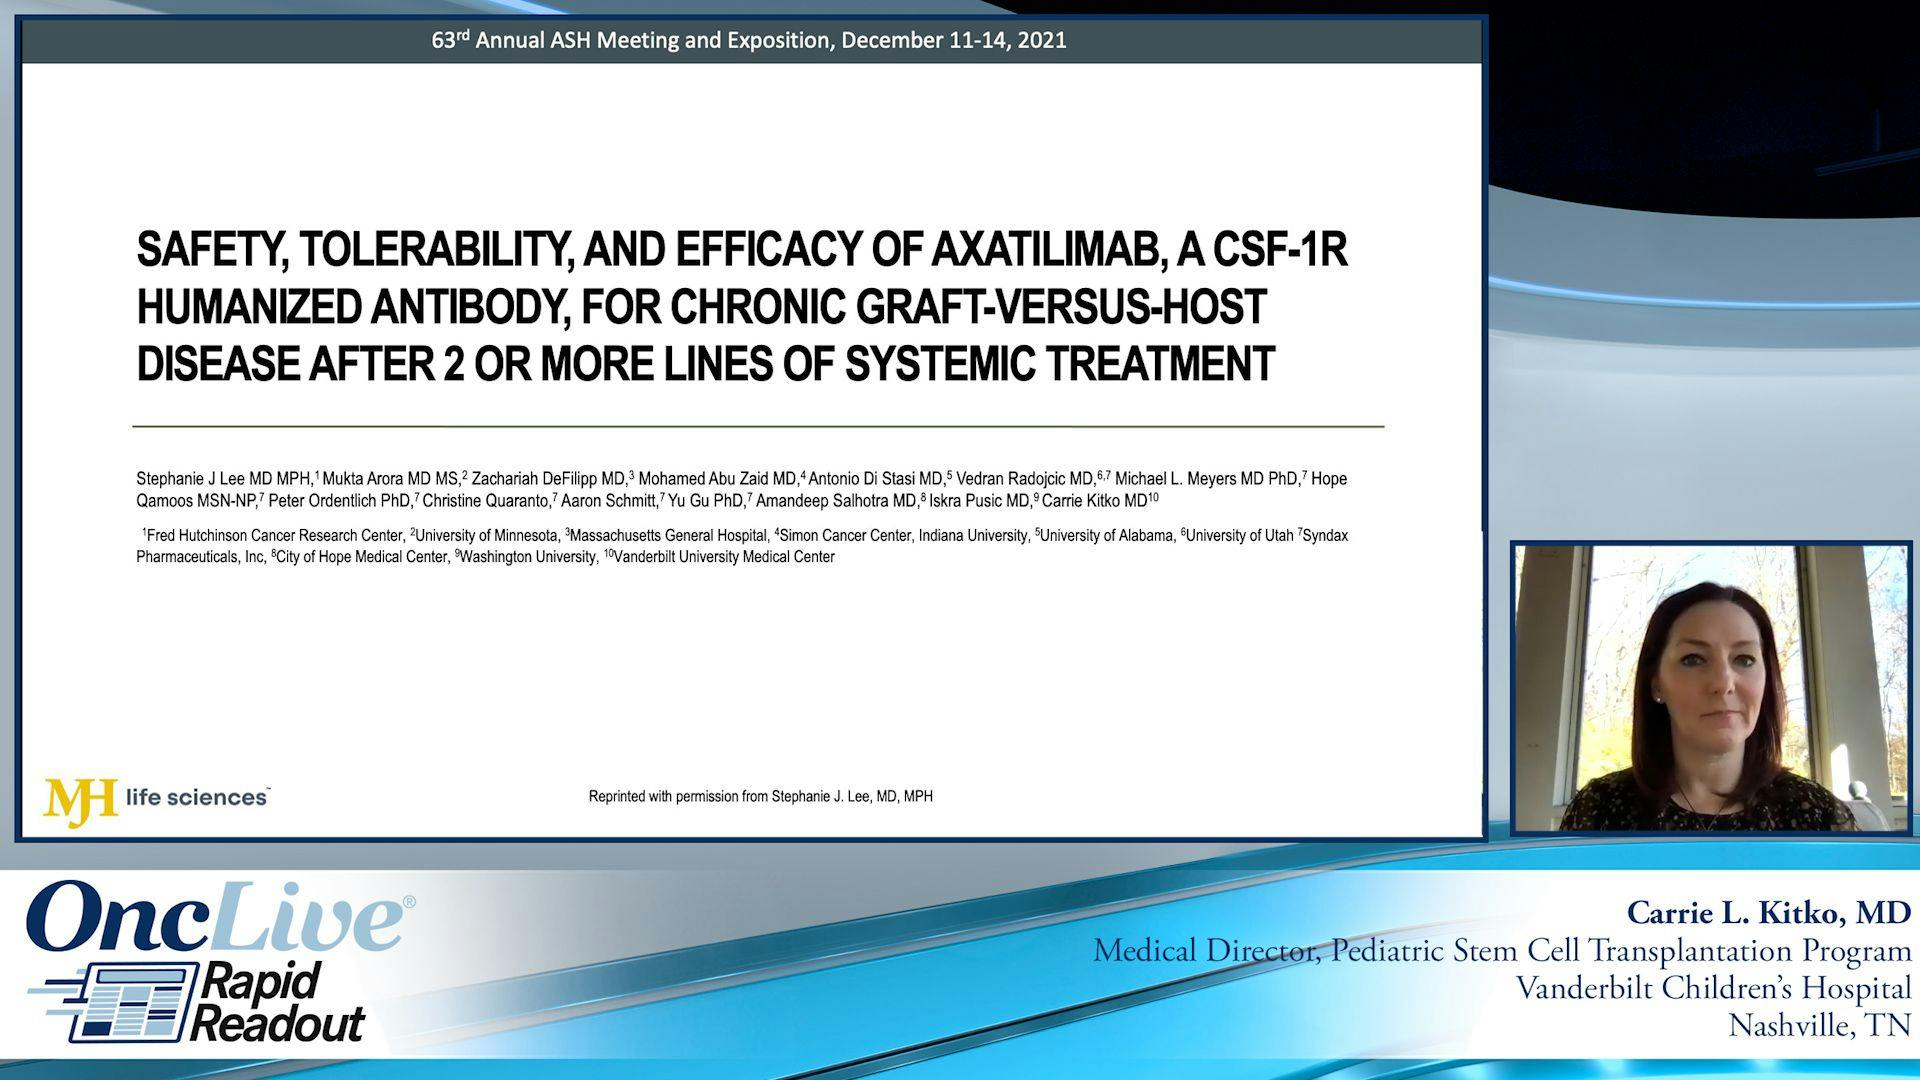 Rapid Readouts: Safety, Tolerability, and Efficacy of Axatilimab, a CSF-1R humanized antibody, for Chronic Graft-versus-Host Disease after 2 or more Lines of Systemic Treatment